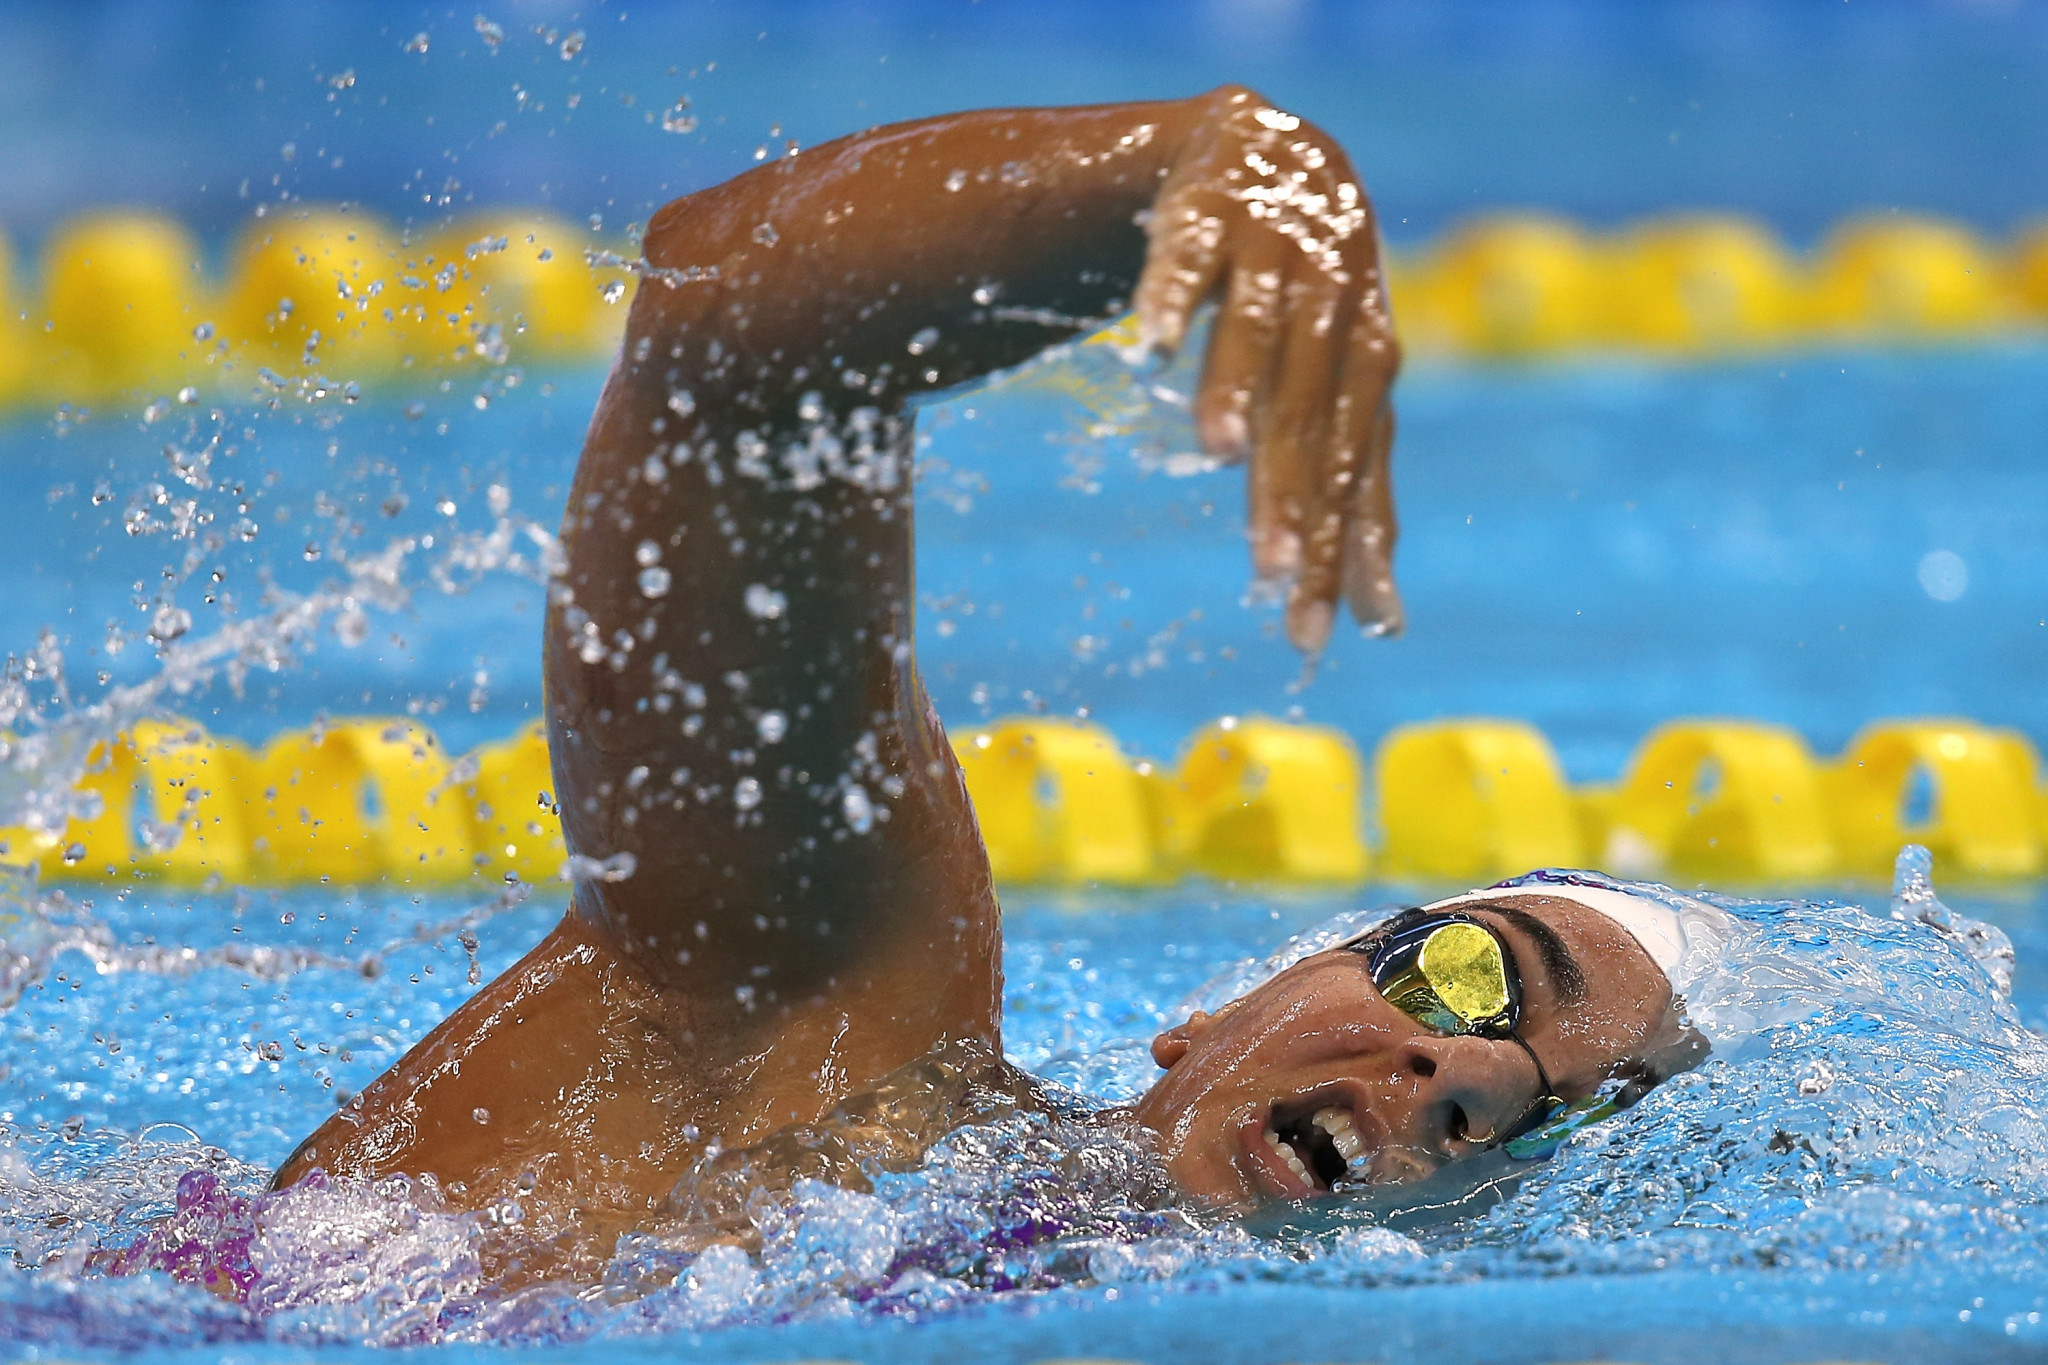 Home favourite Camille Rodrigues is confident of taking the competition by storm as the World Para Swimming World Series resumes in São Paulo in Brazil over the coming three days ©Getty Images